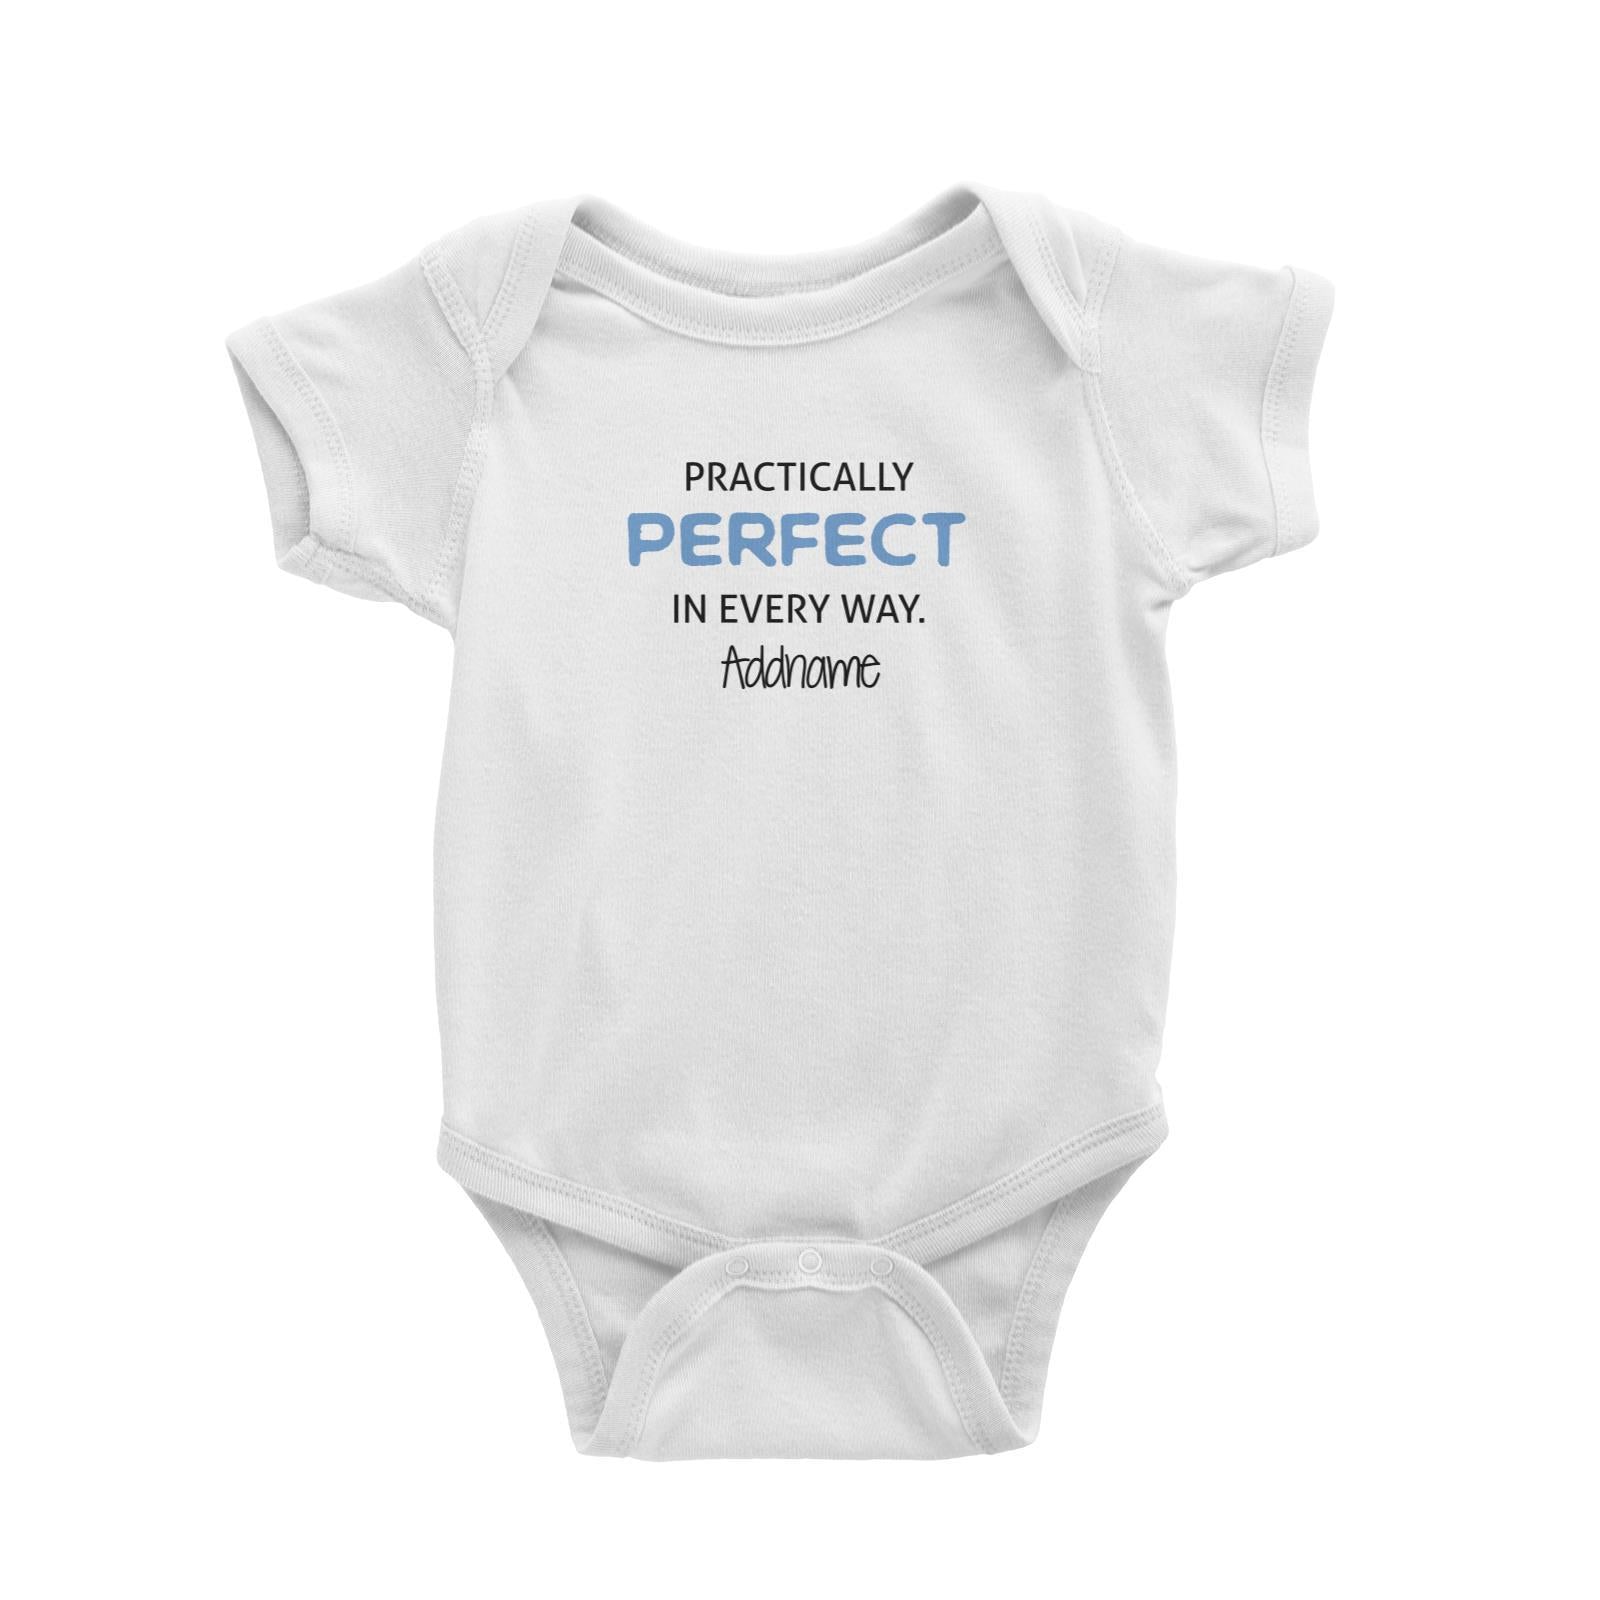 Practically Perfect in Every Way Boys Addname Baby Romper